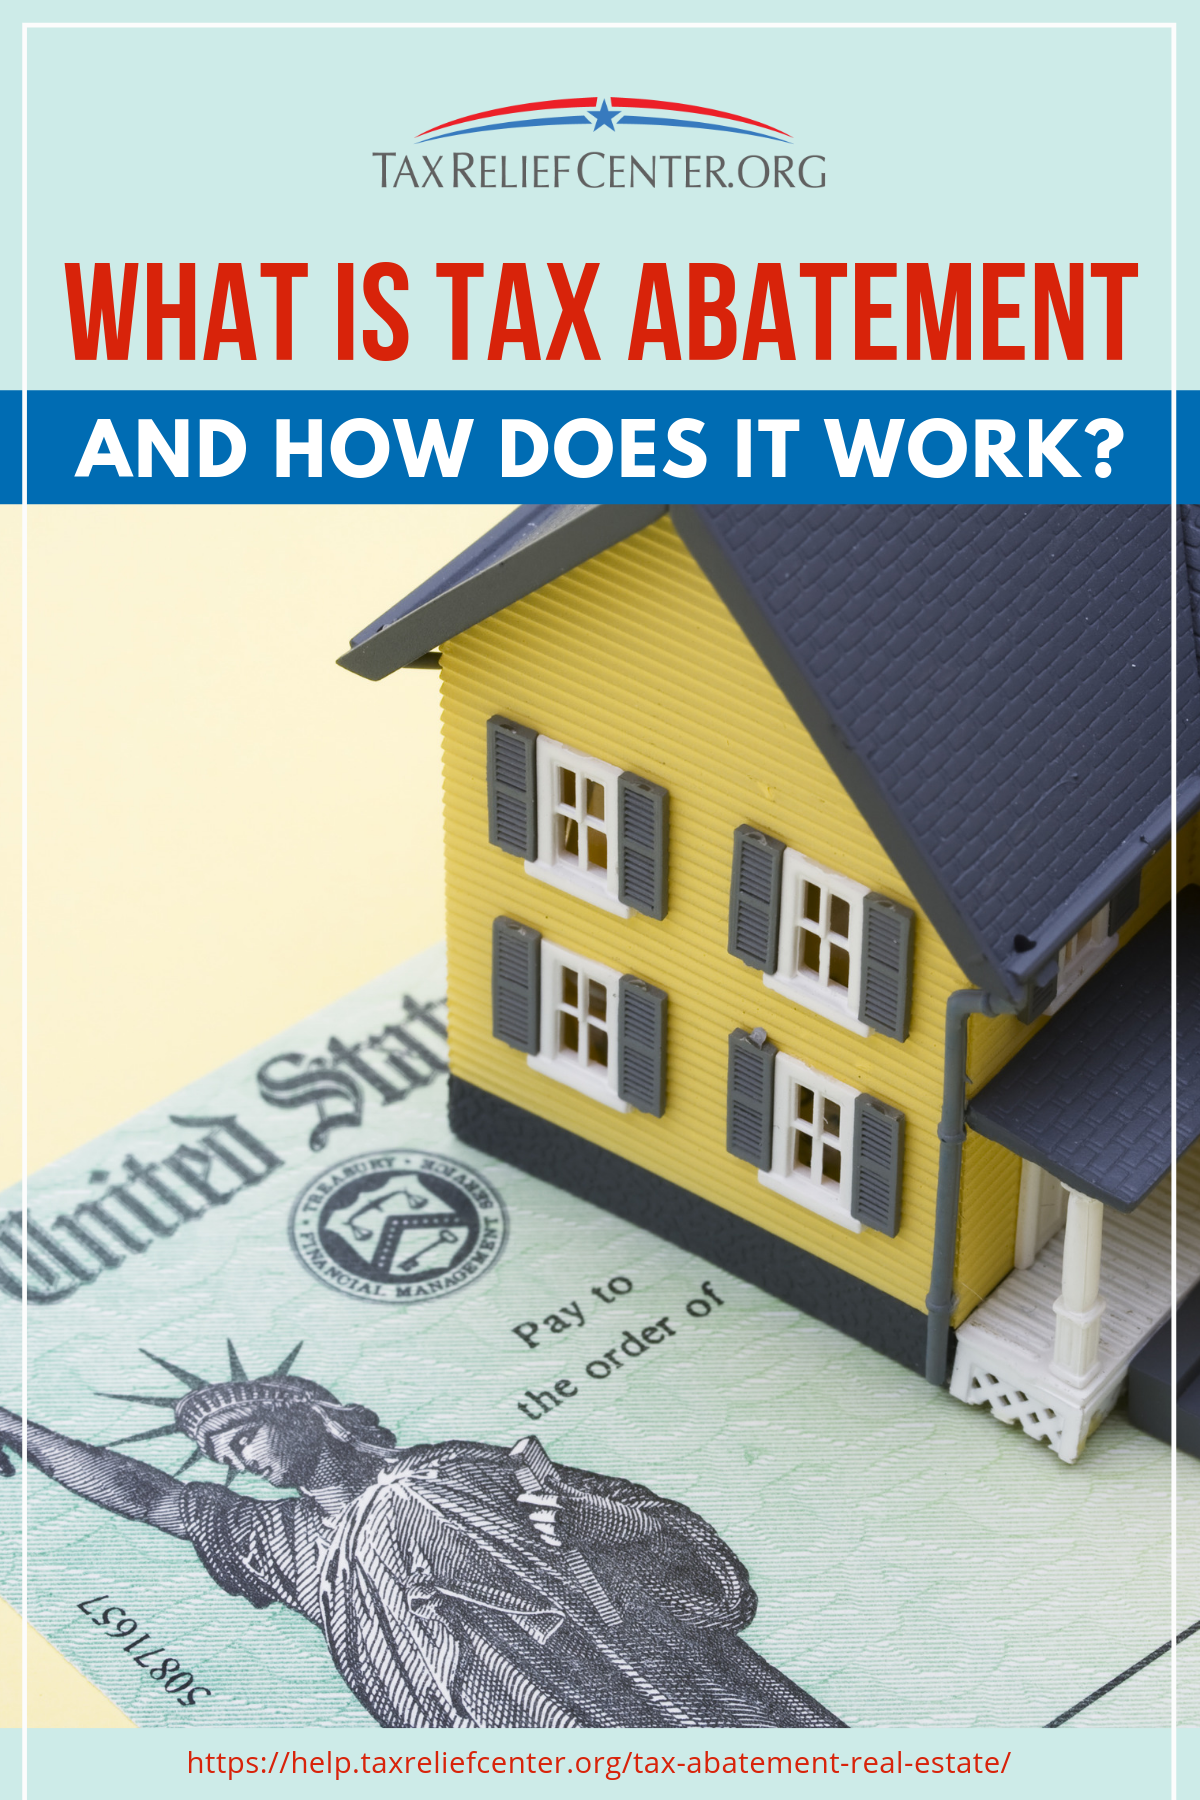 What Is Tax Abatement And How Does It Work?